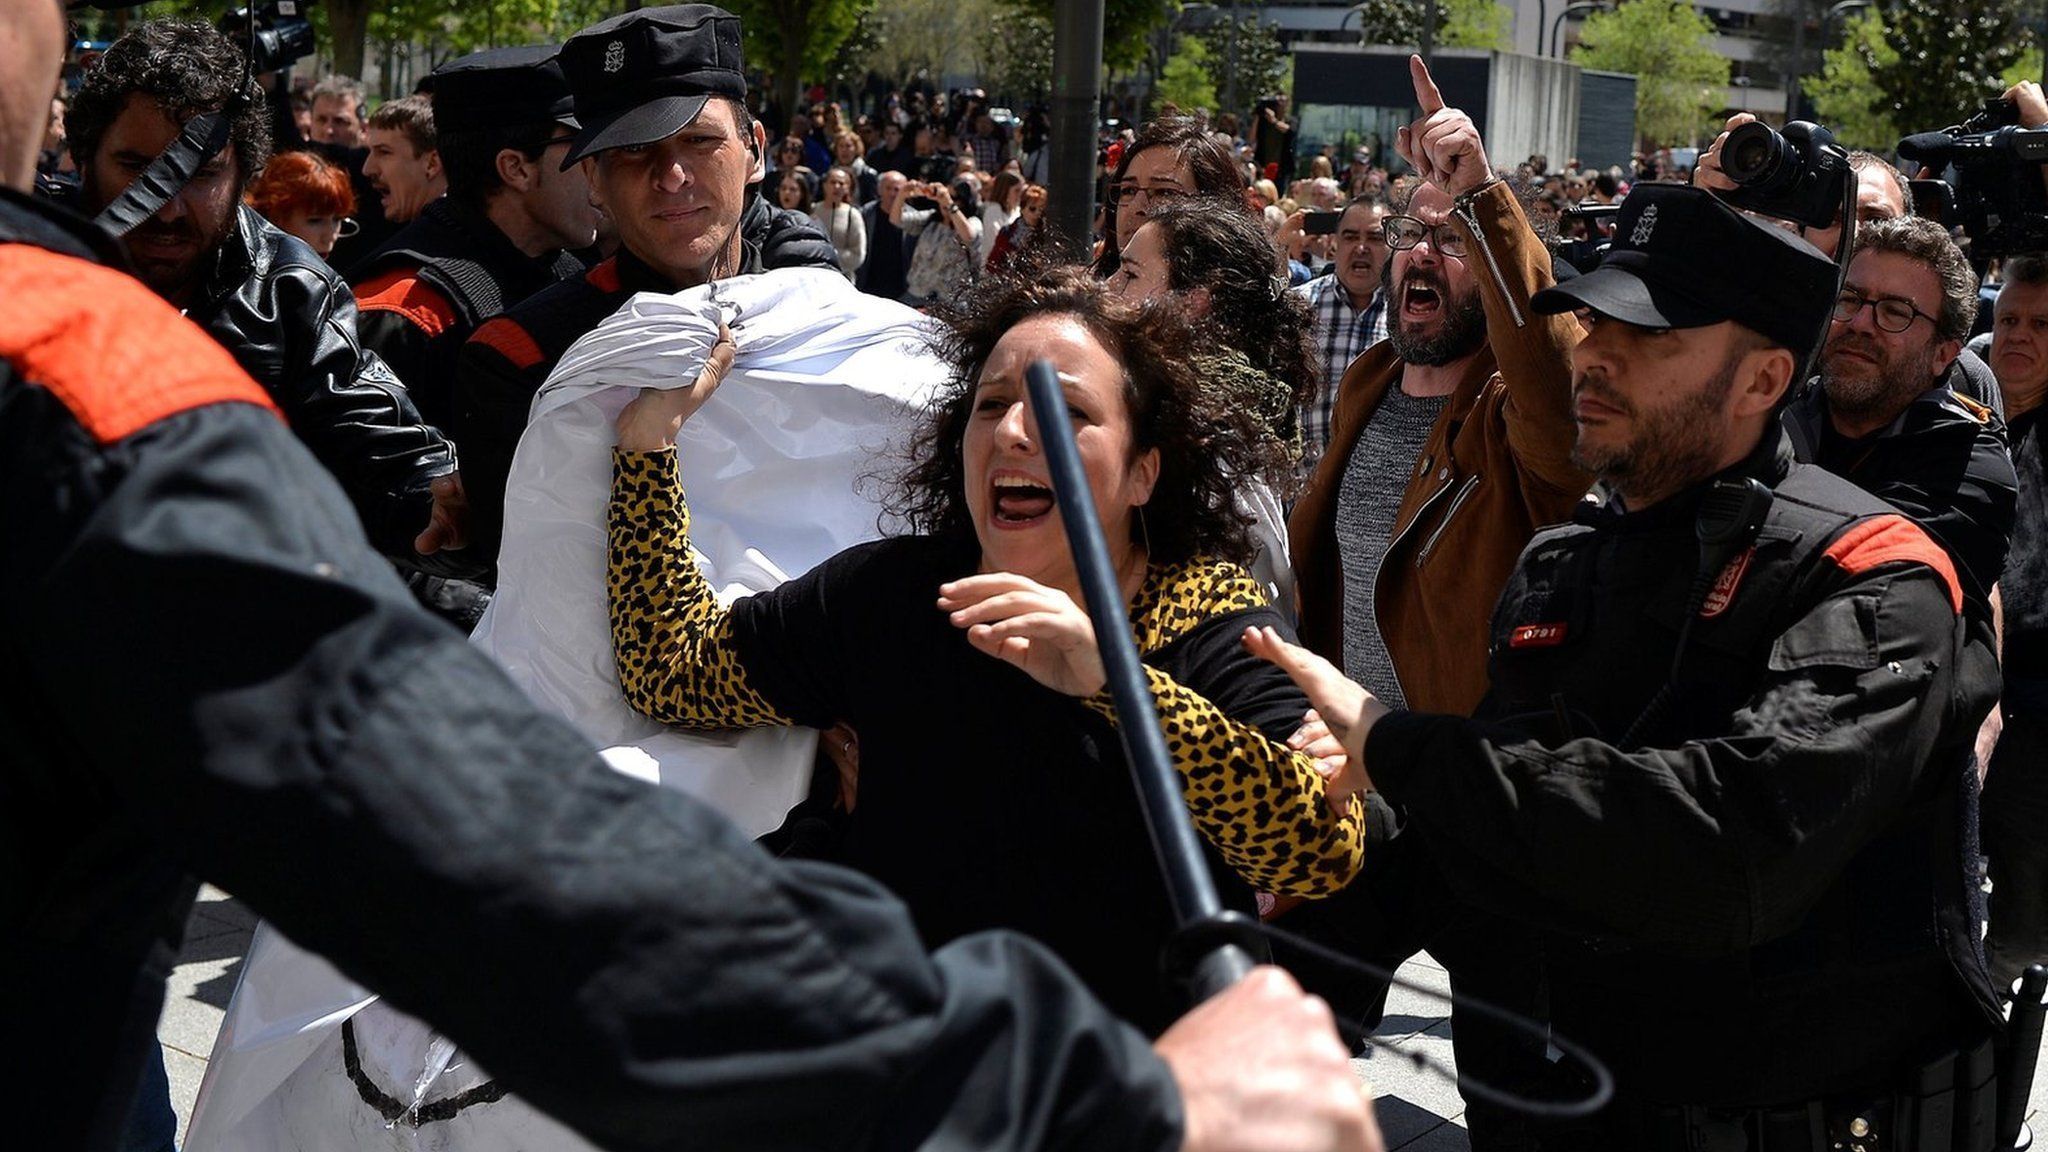 A protester breaks through a police line after a nine-year sentence was given to five men accused of the multiple rape of a woman